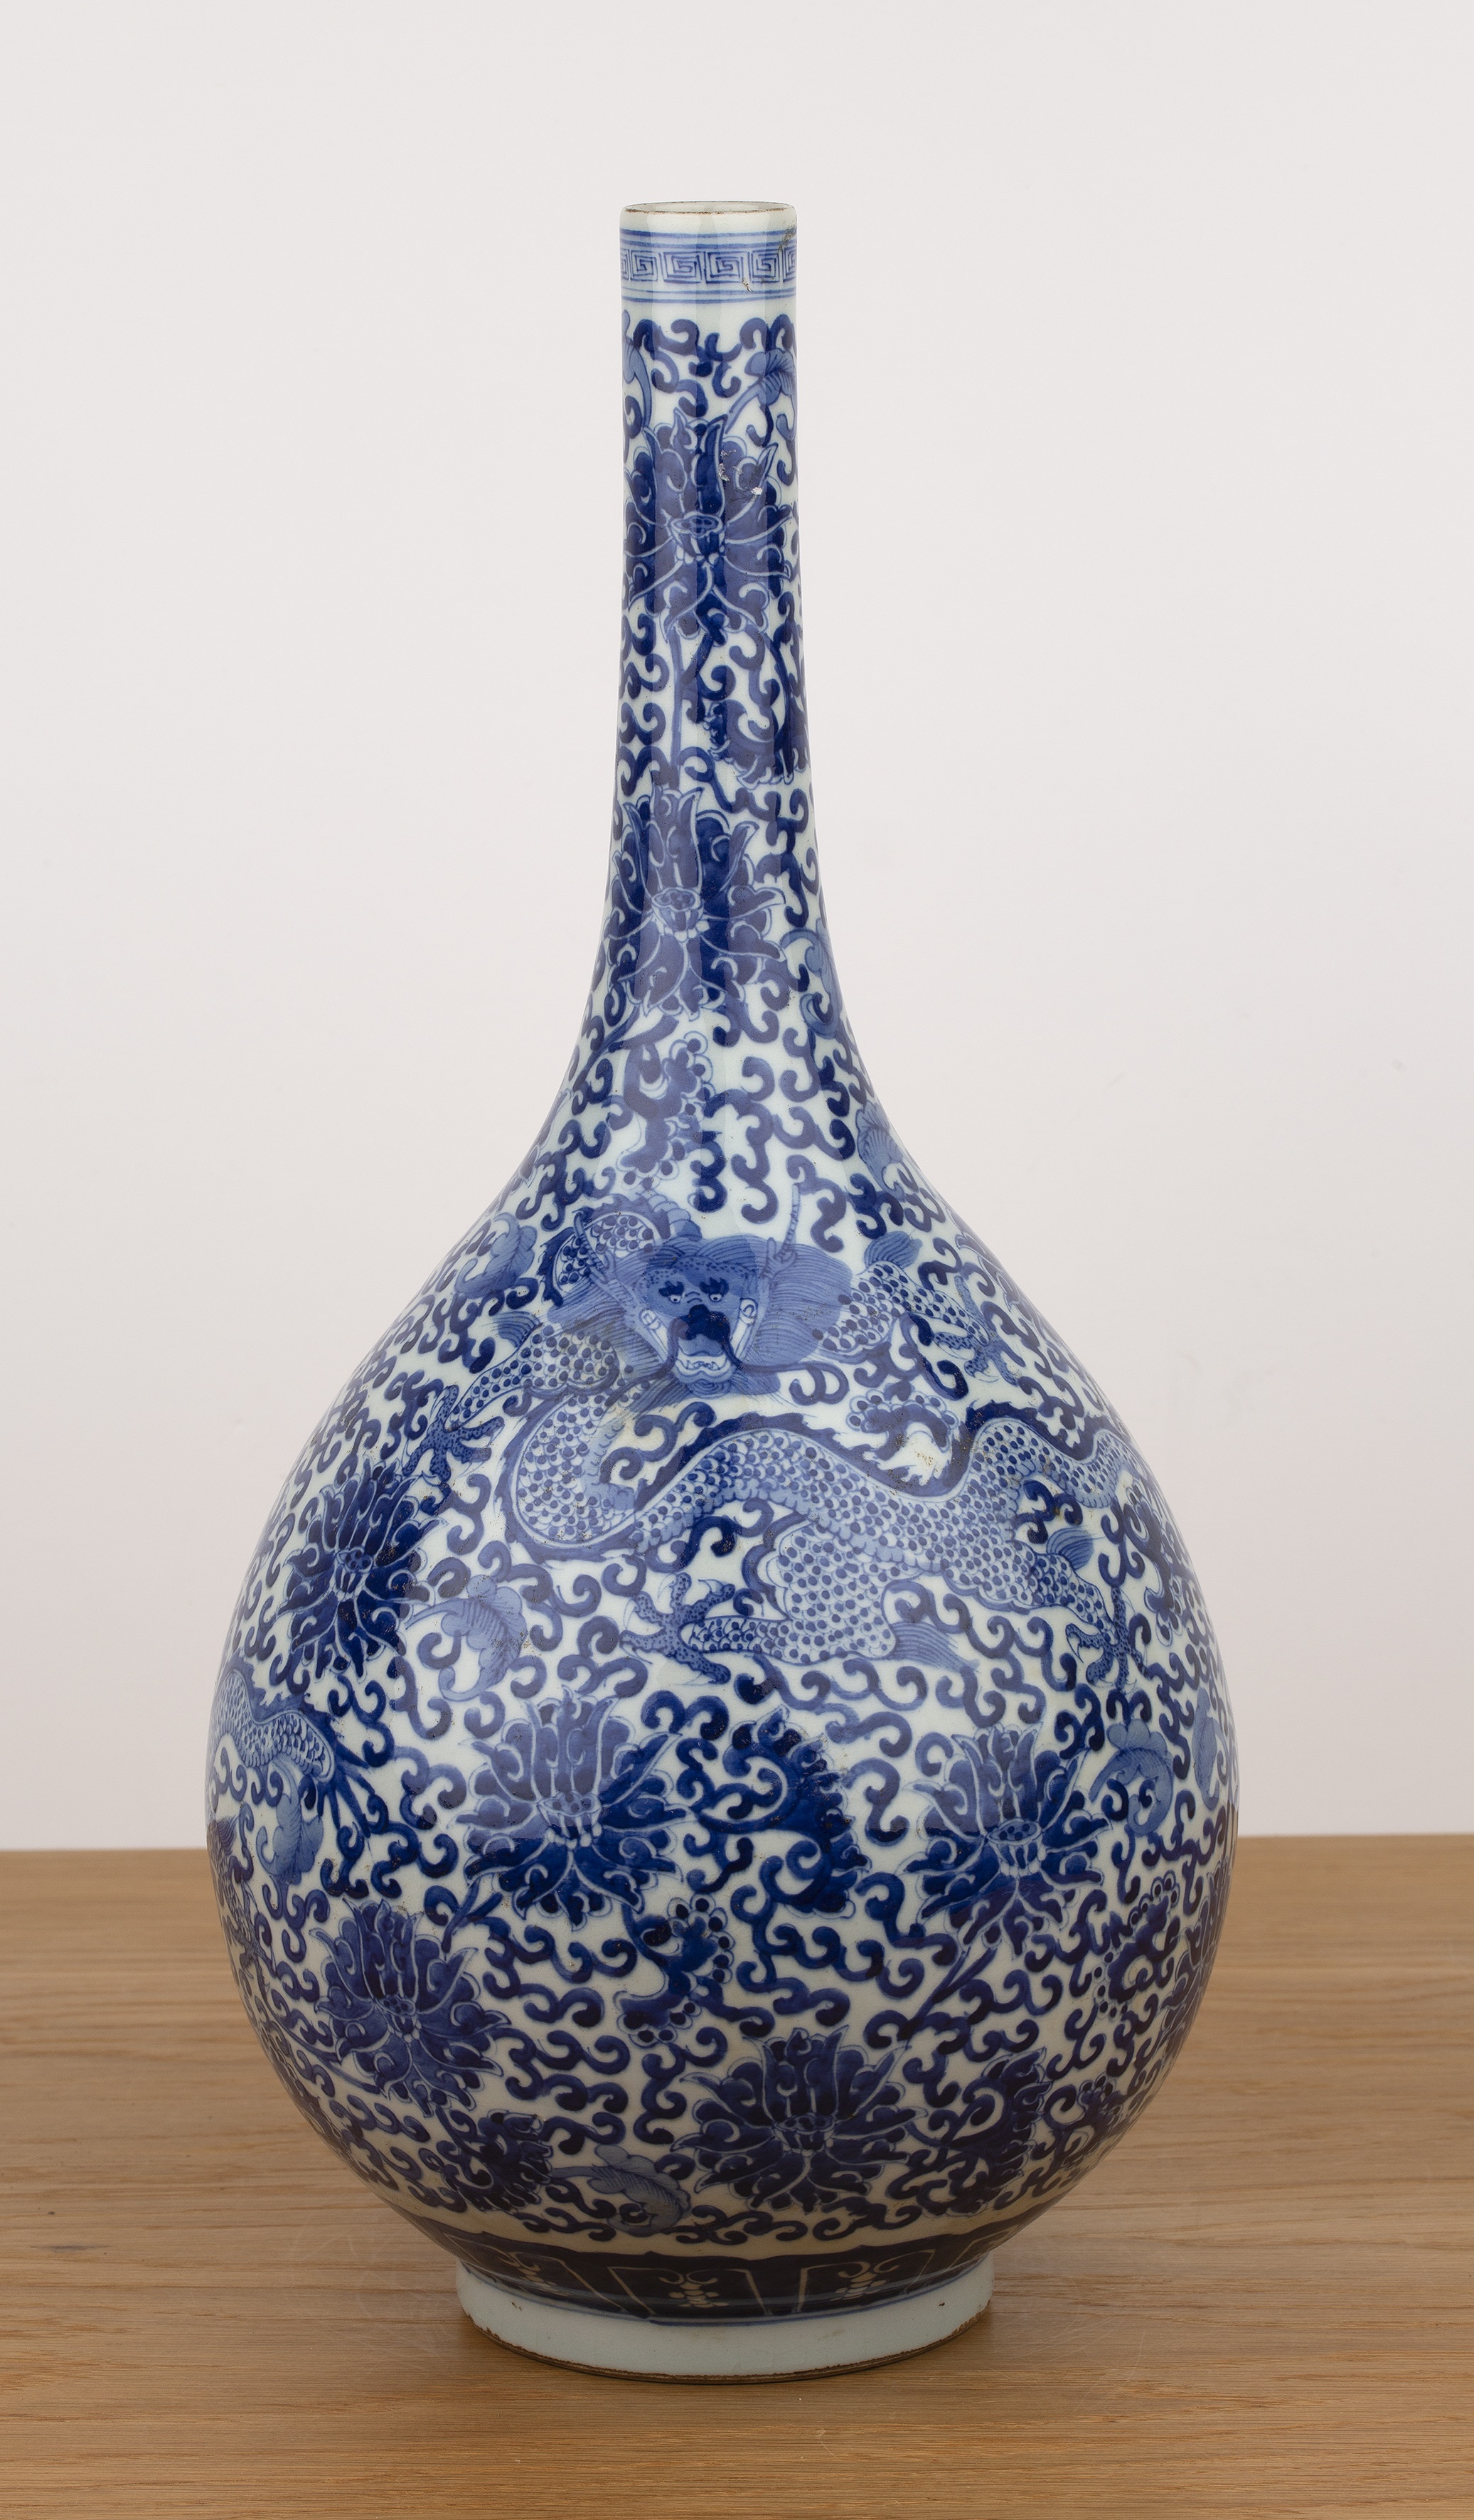 Blue and white porcelain bottle vase Chinese, early 20th Century painted with trailing dragons and - Image 3 of 5